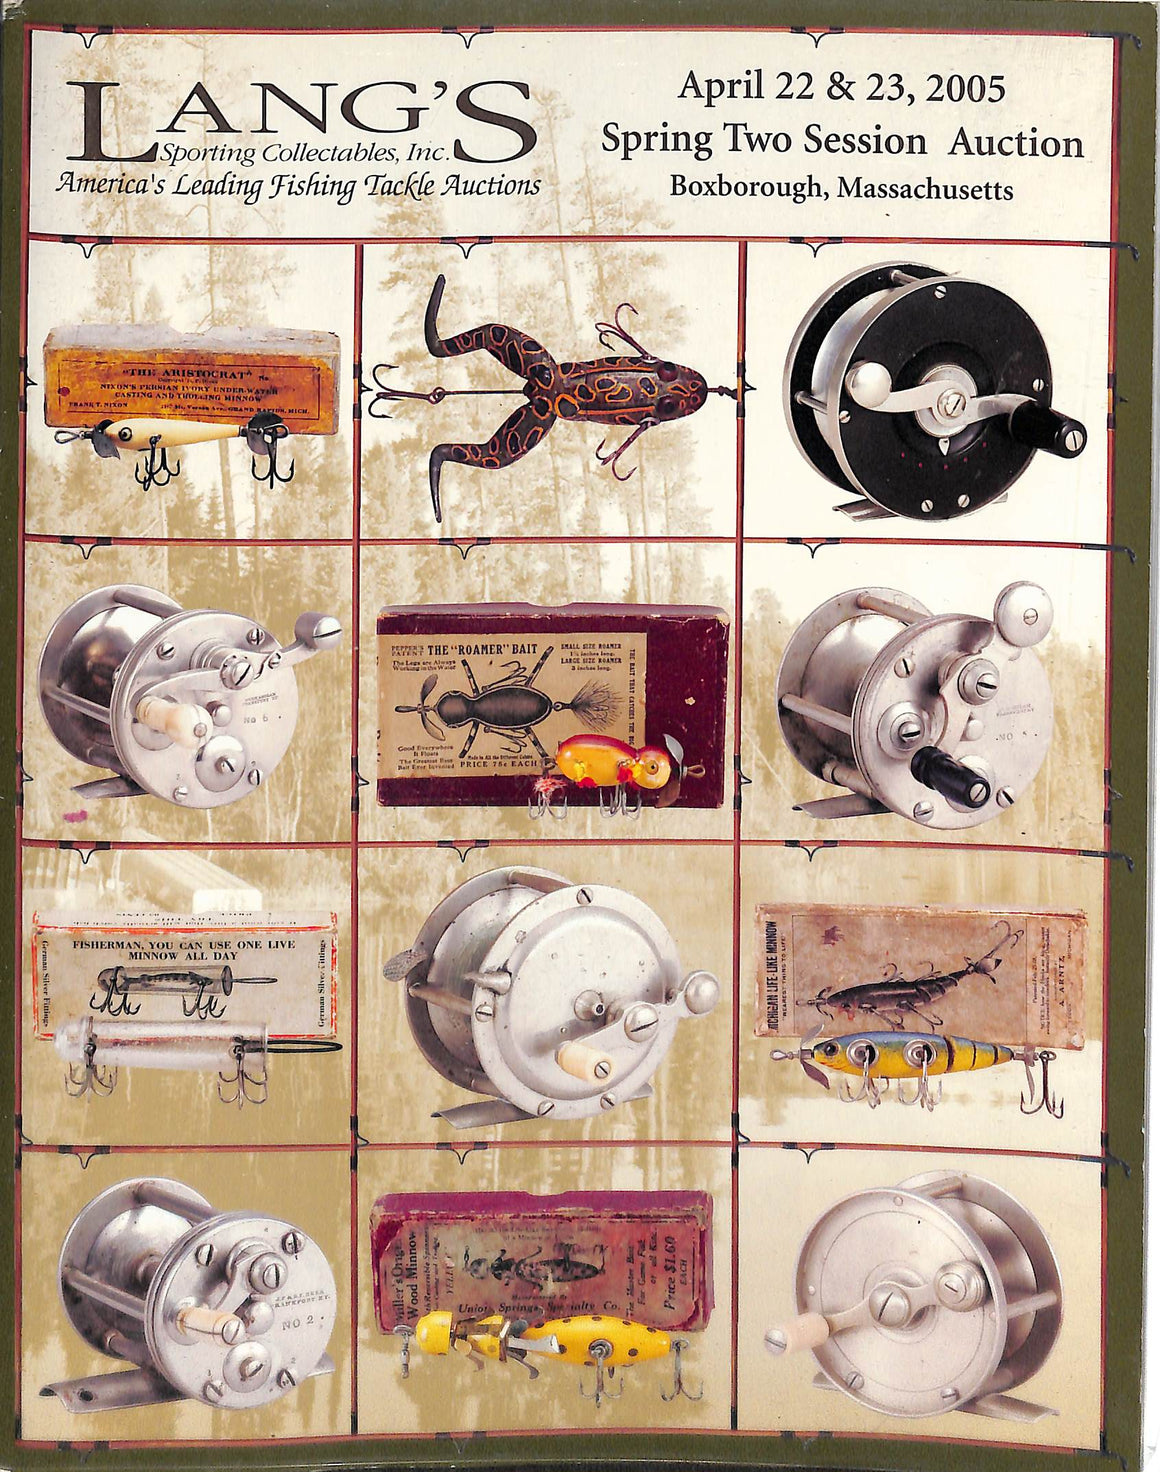 "Lang's Sporting Collectables: America's Leading Fishing Tackle Auctions" 2005